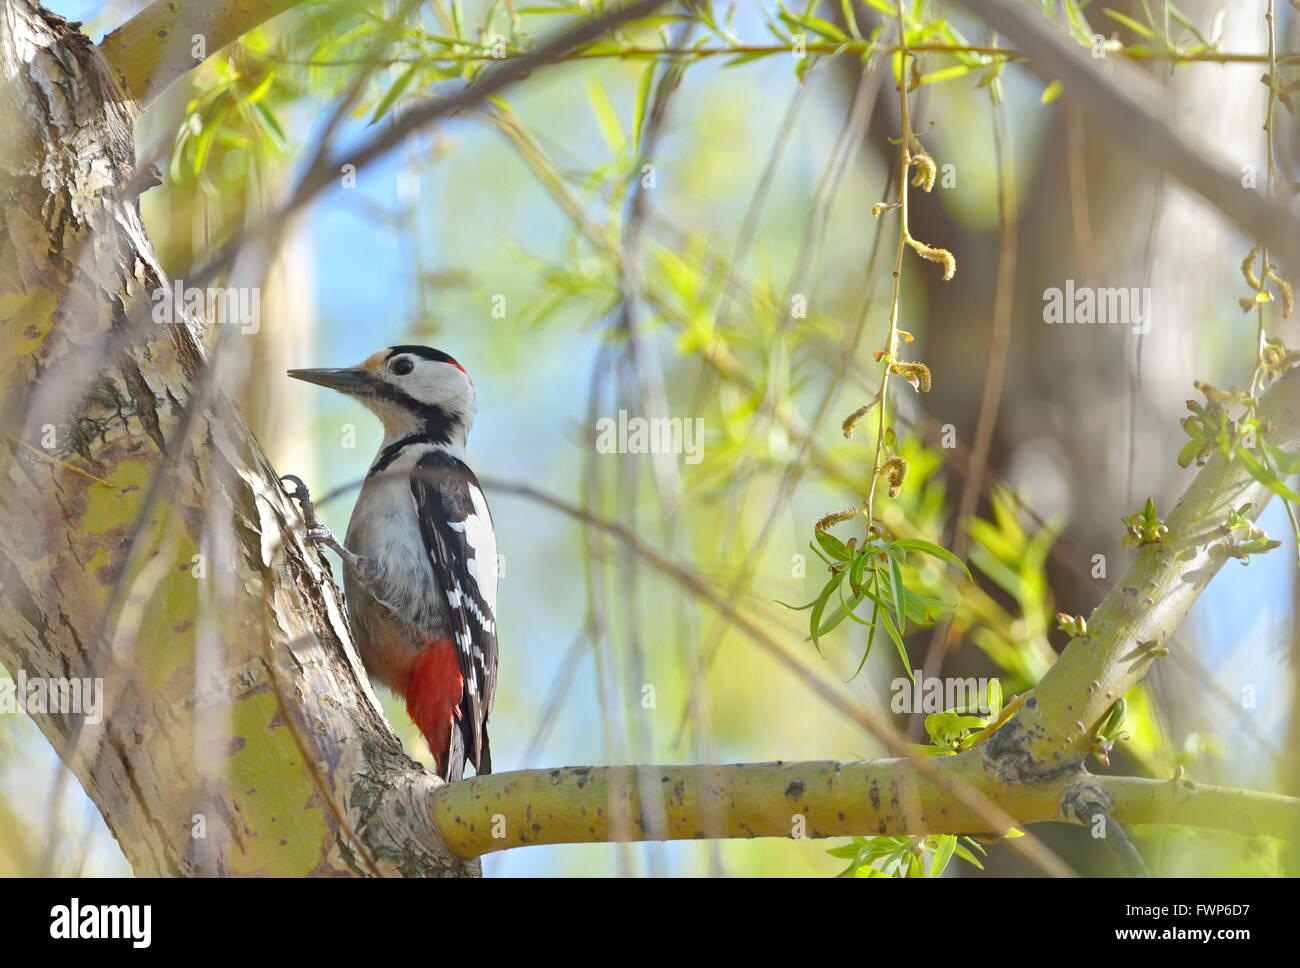 Great spotted Woodpecker perched on a birch branch Stock Photo